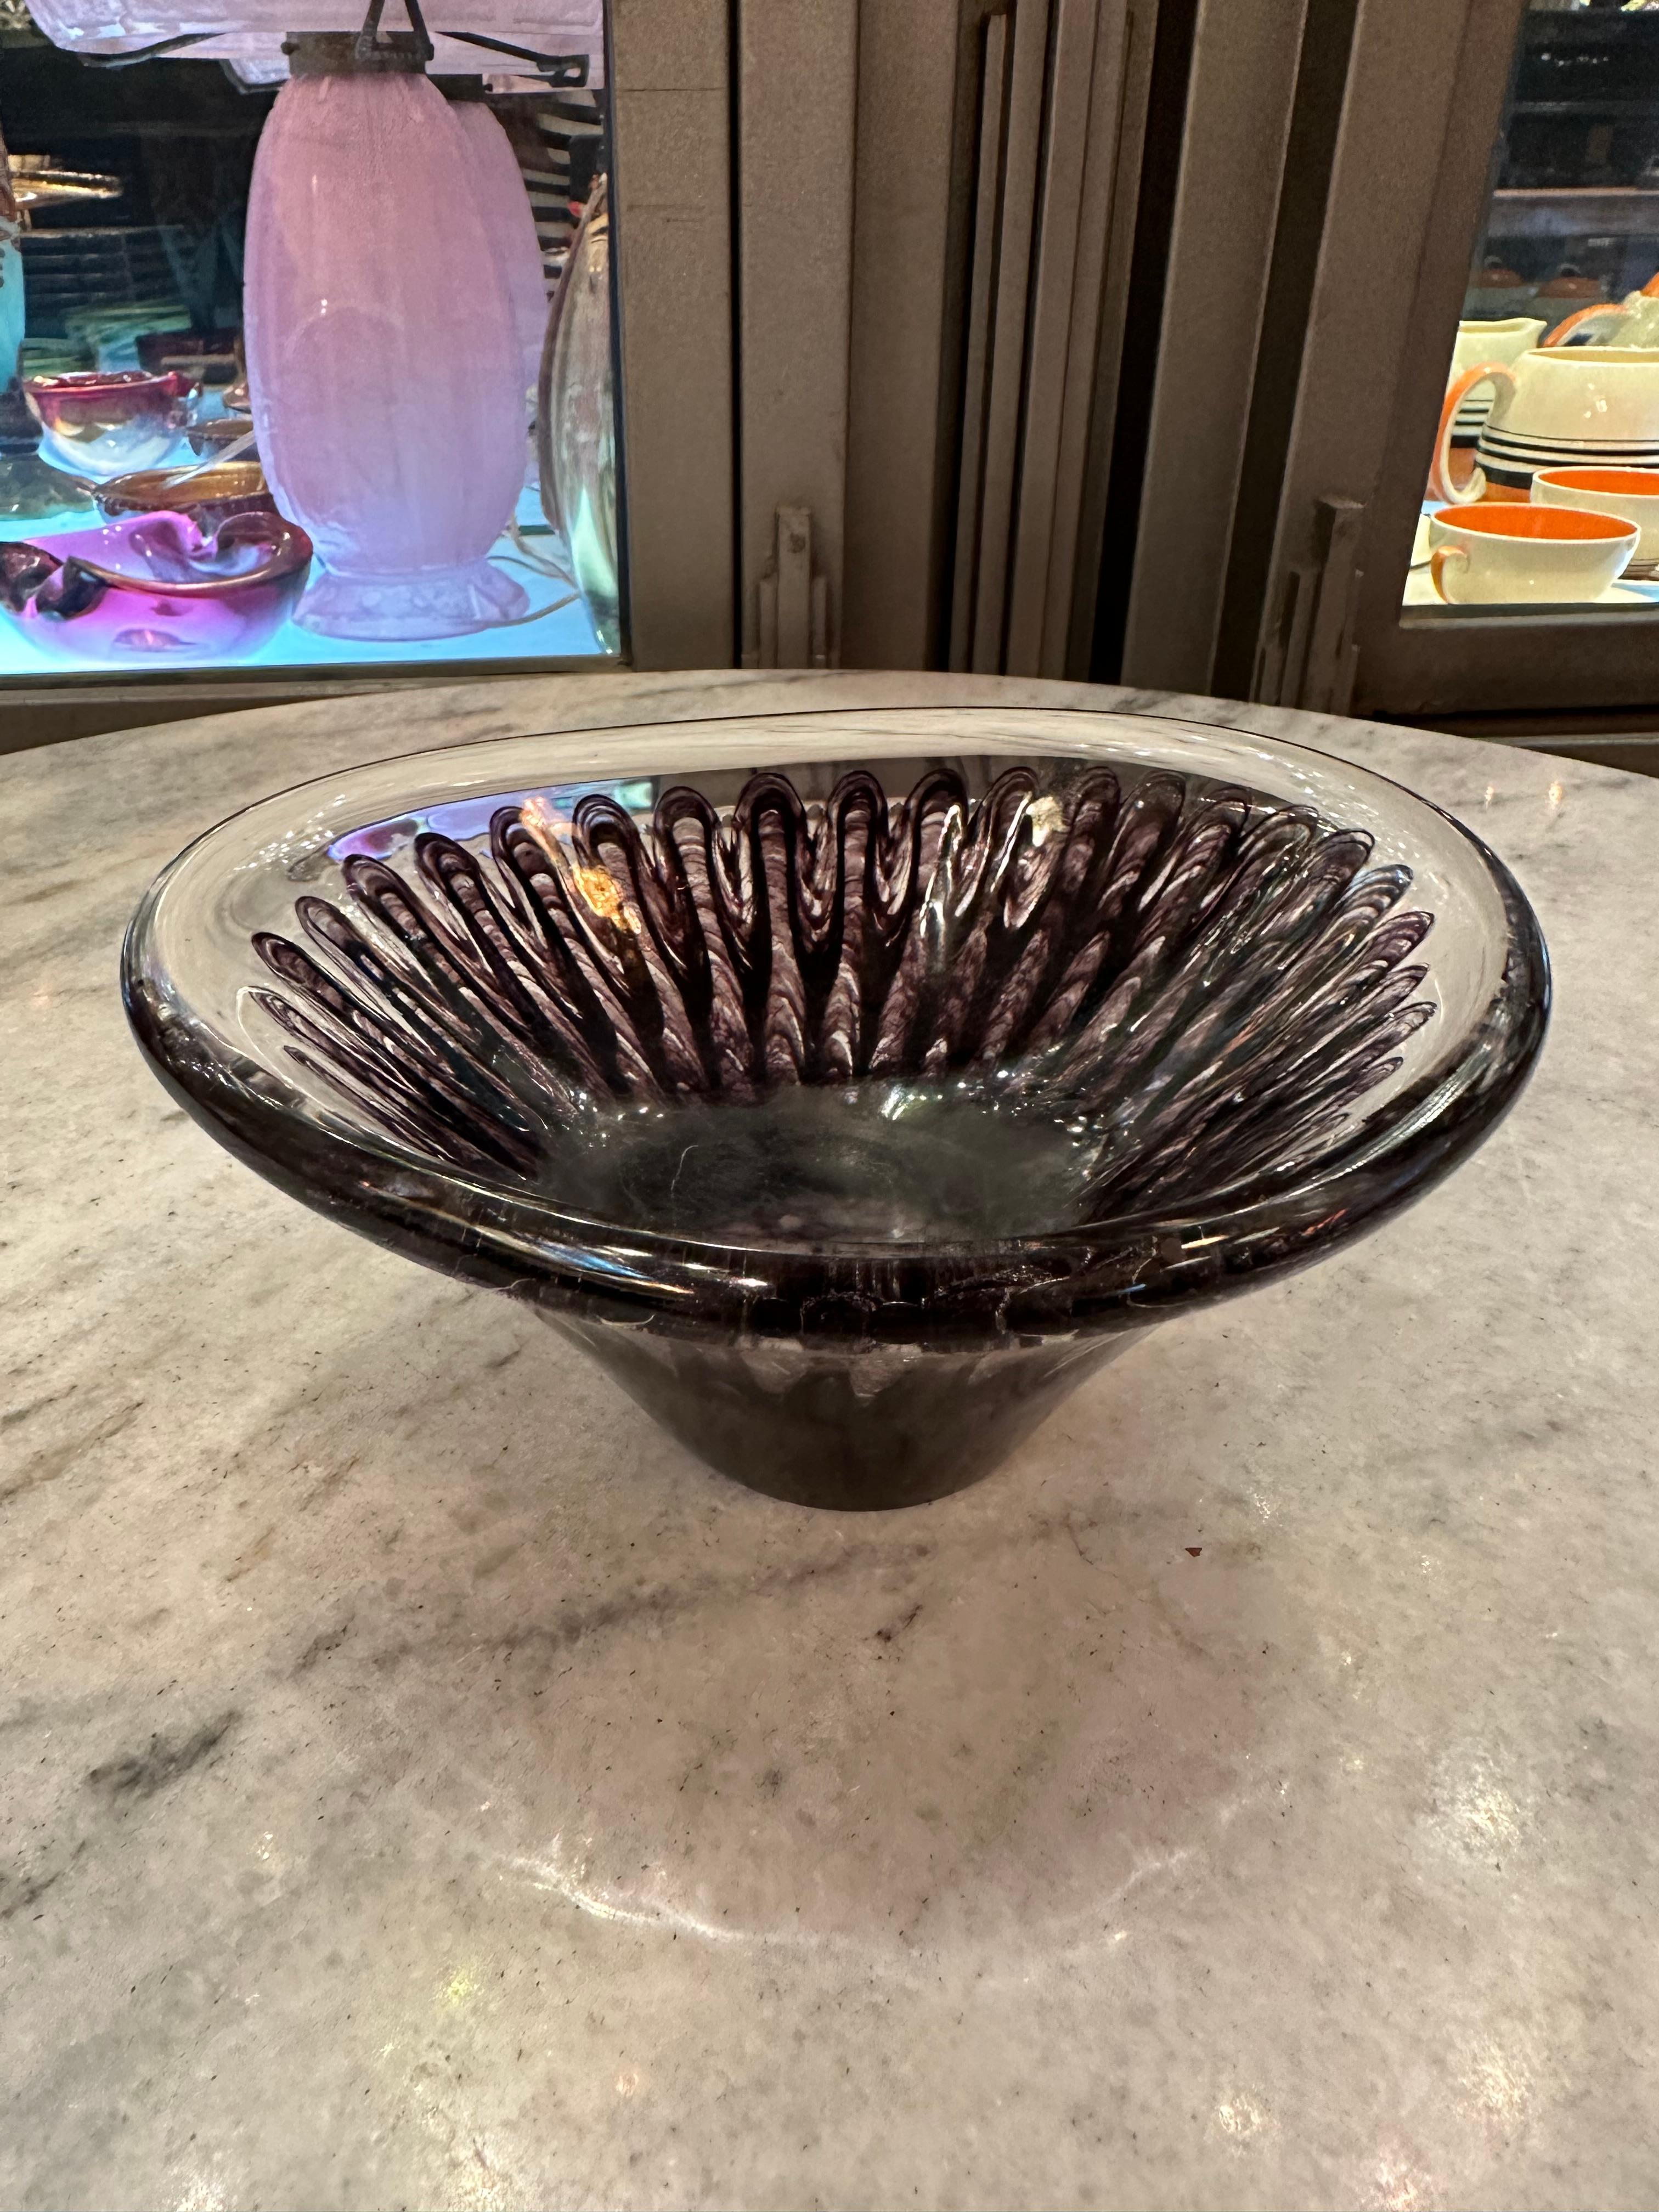 Murano.
We have specialized in the sale of Art Deco and Art Nouveau and Vintage styles since 1982. If you have any questions we are at your disposal.
Pushing the button that reads 'View All From Seller'. And you can see more objects to the style for